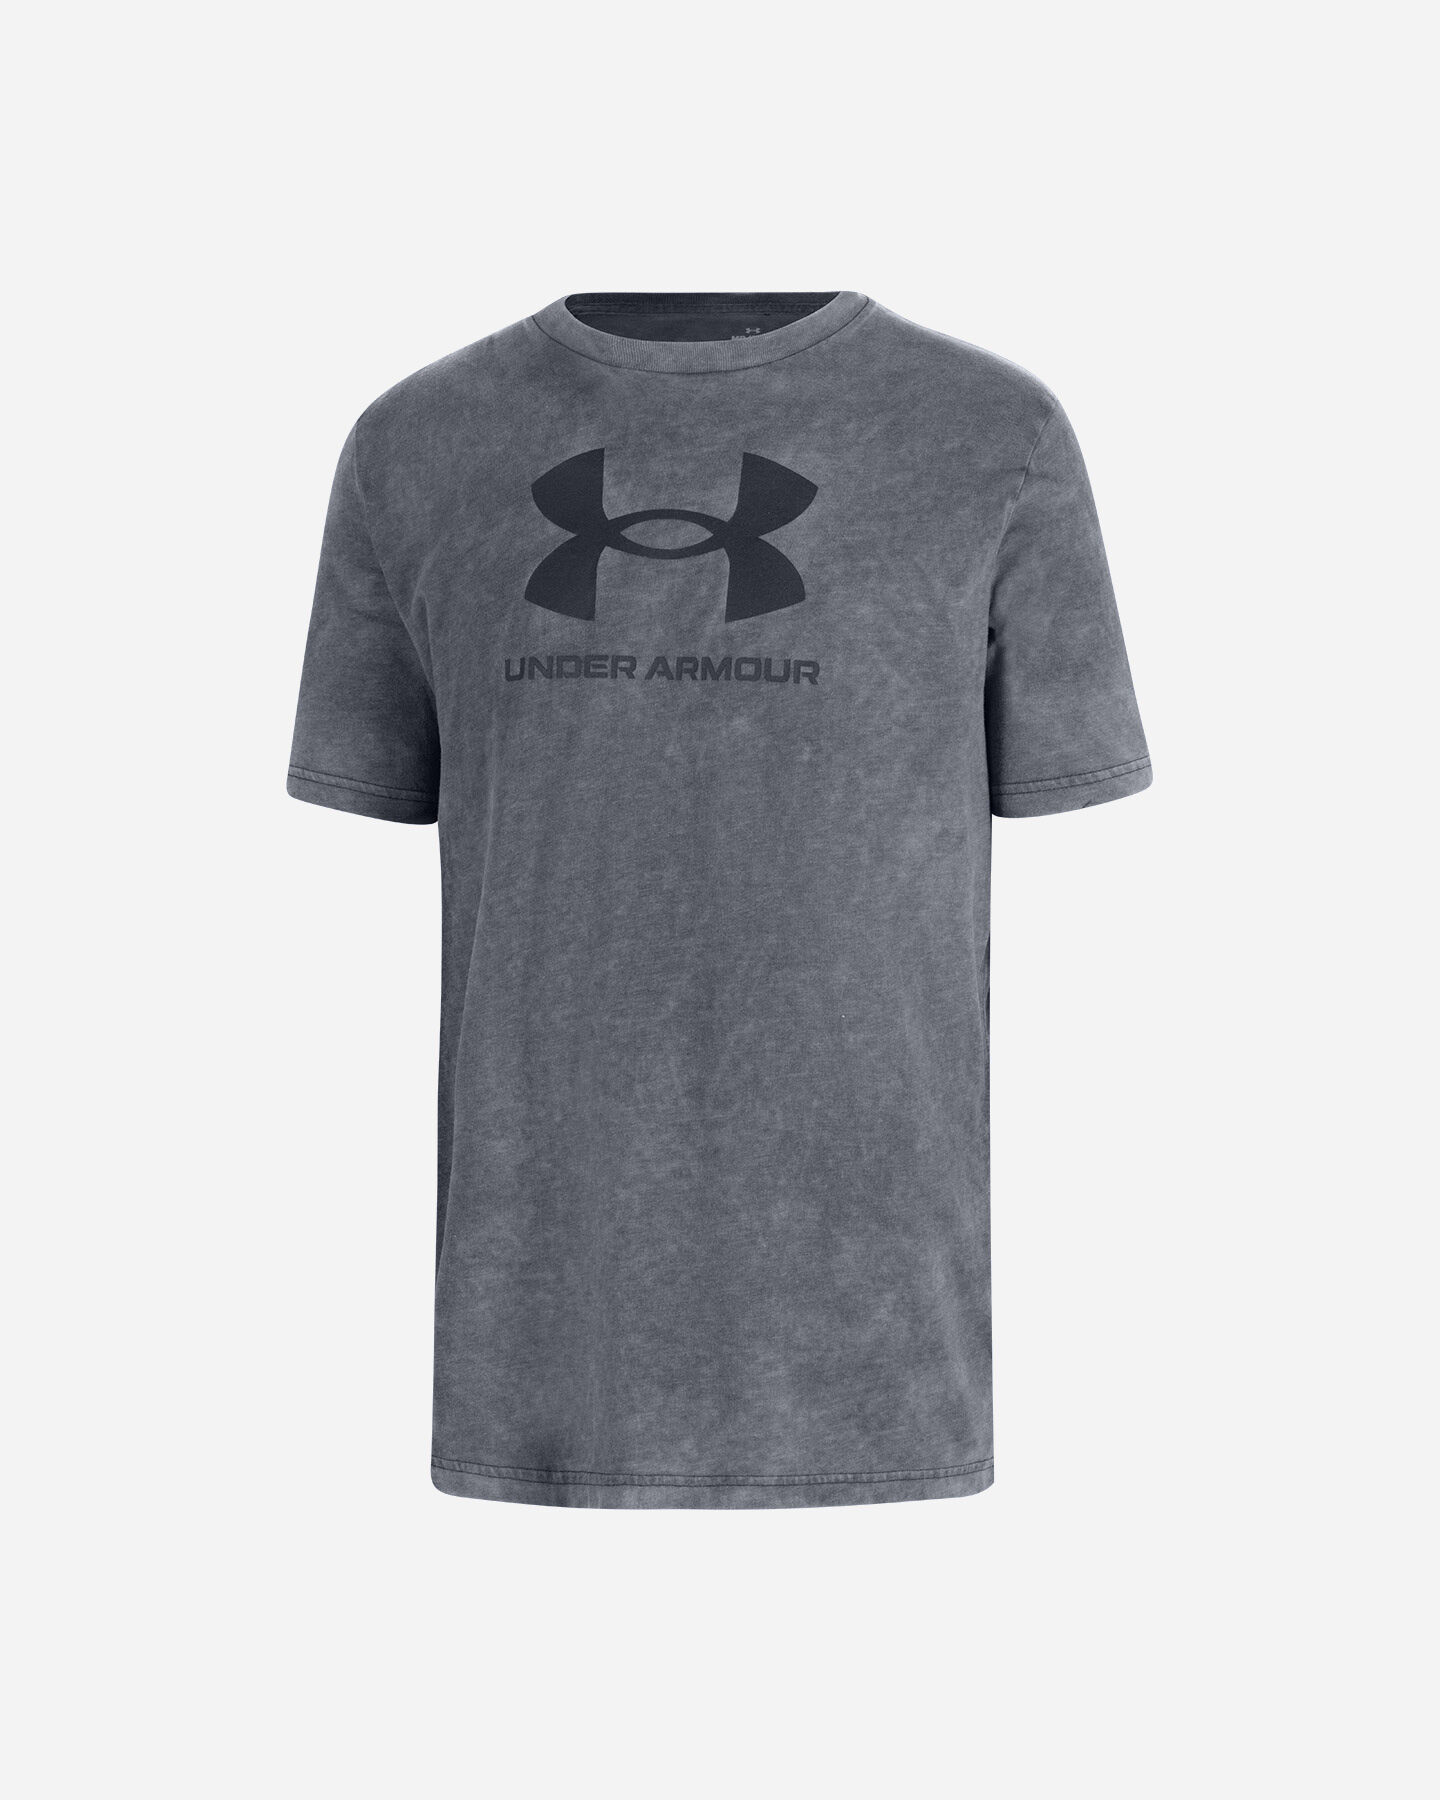  T-Shirt UNDER ARMOUR LOGO WASH TONAL M S5528823|0002|XS scatto 0